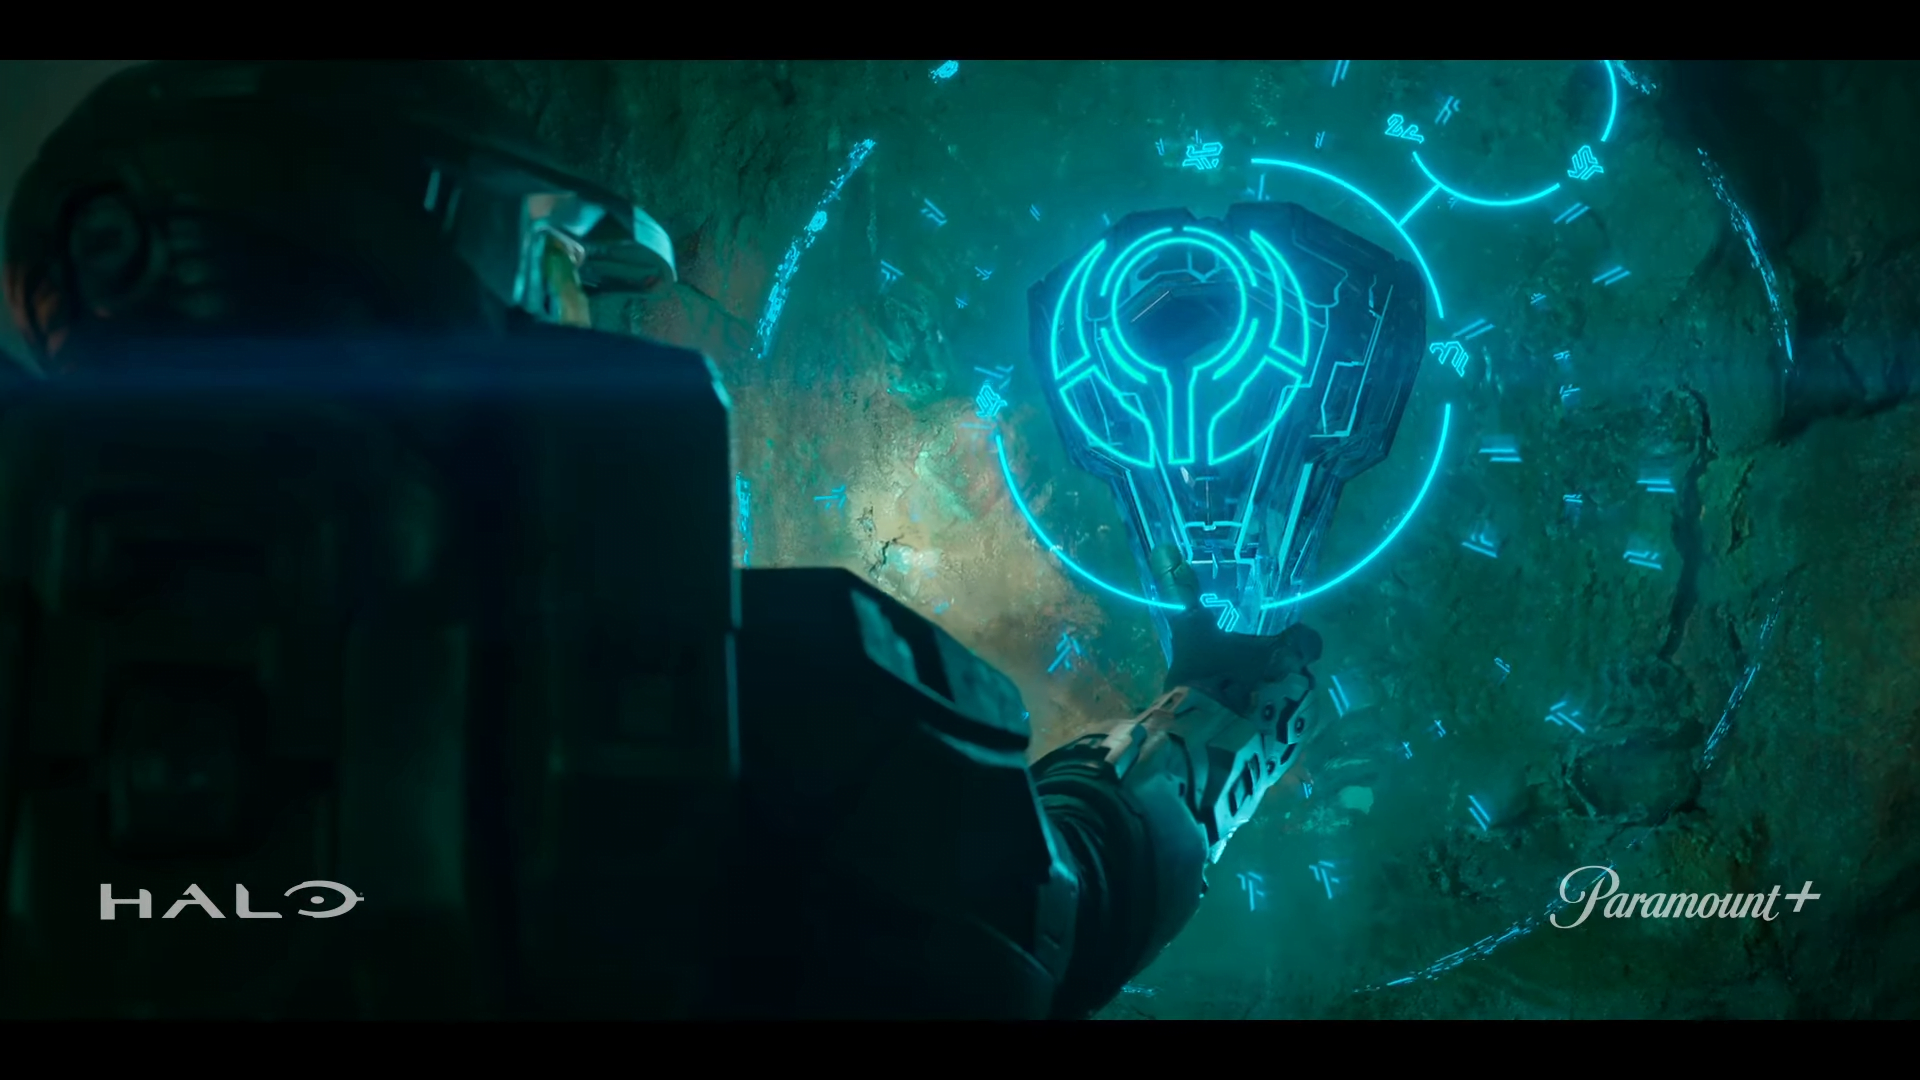 Master Chief touches a Forerunner artifact overlaid by lights and symbols.